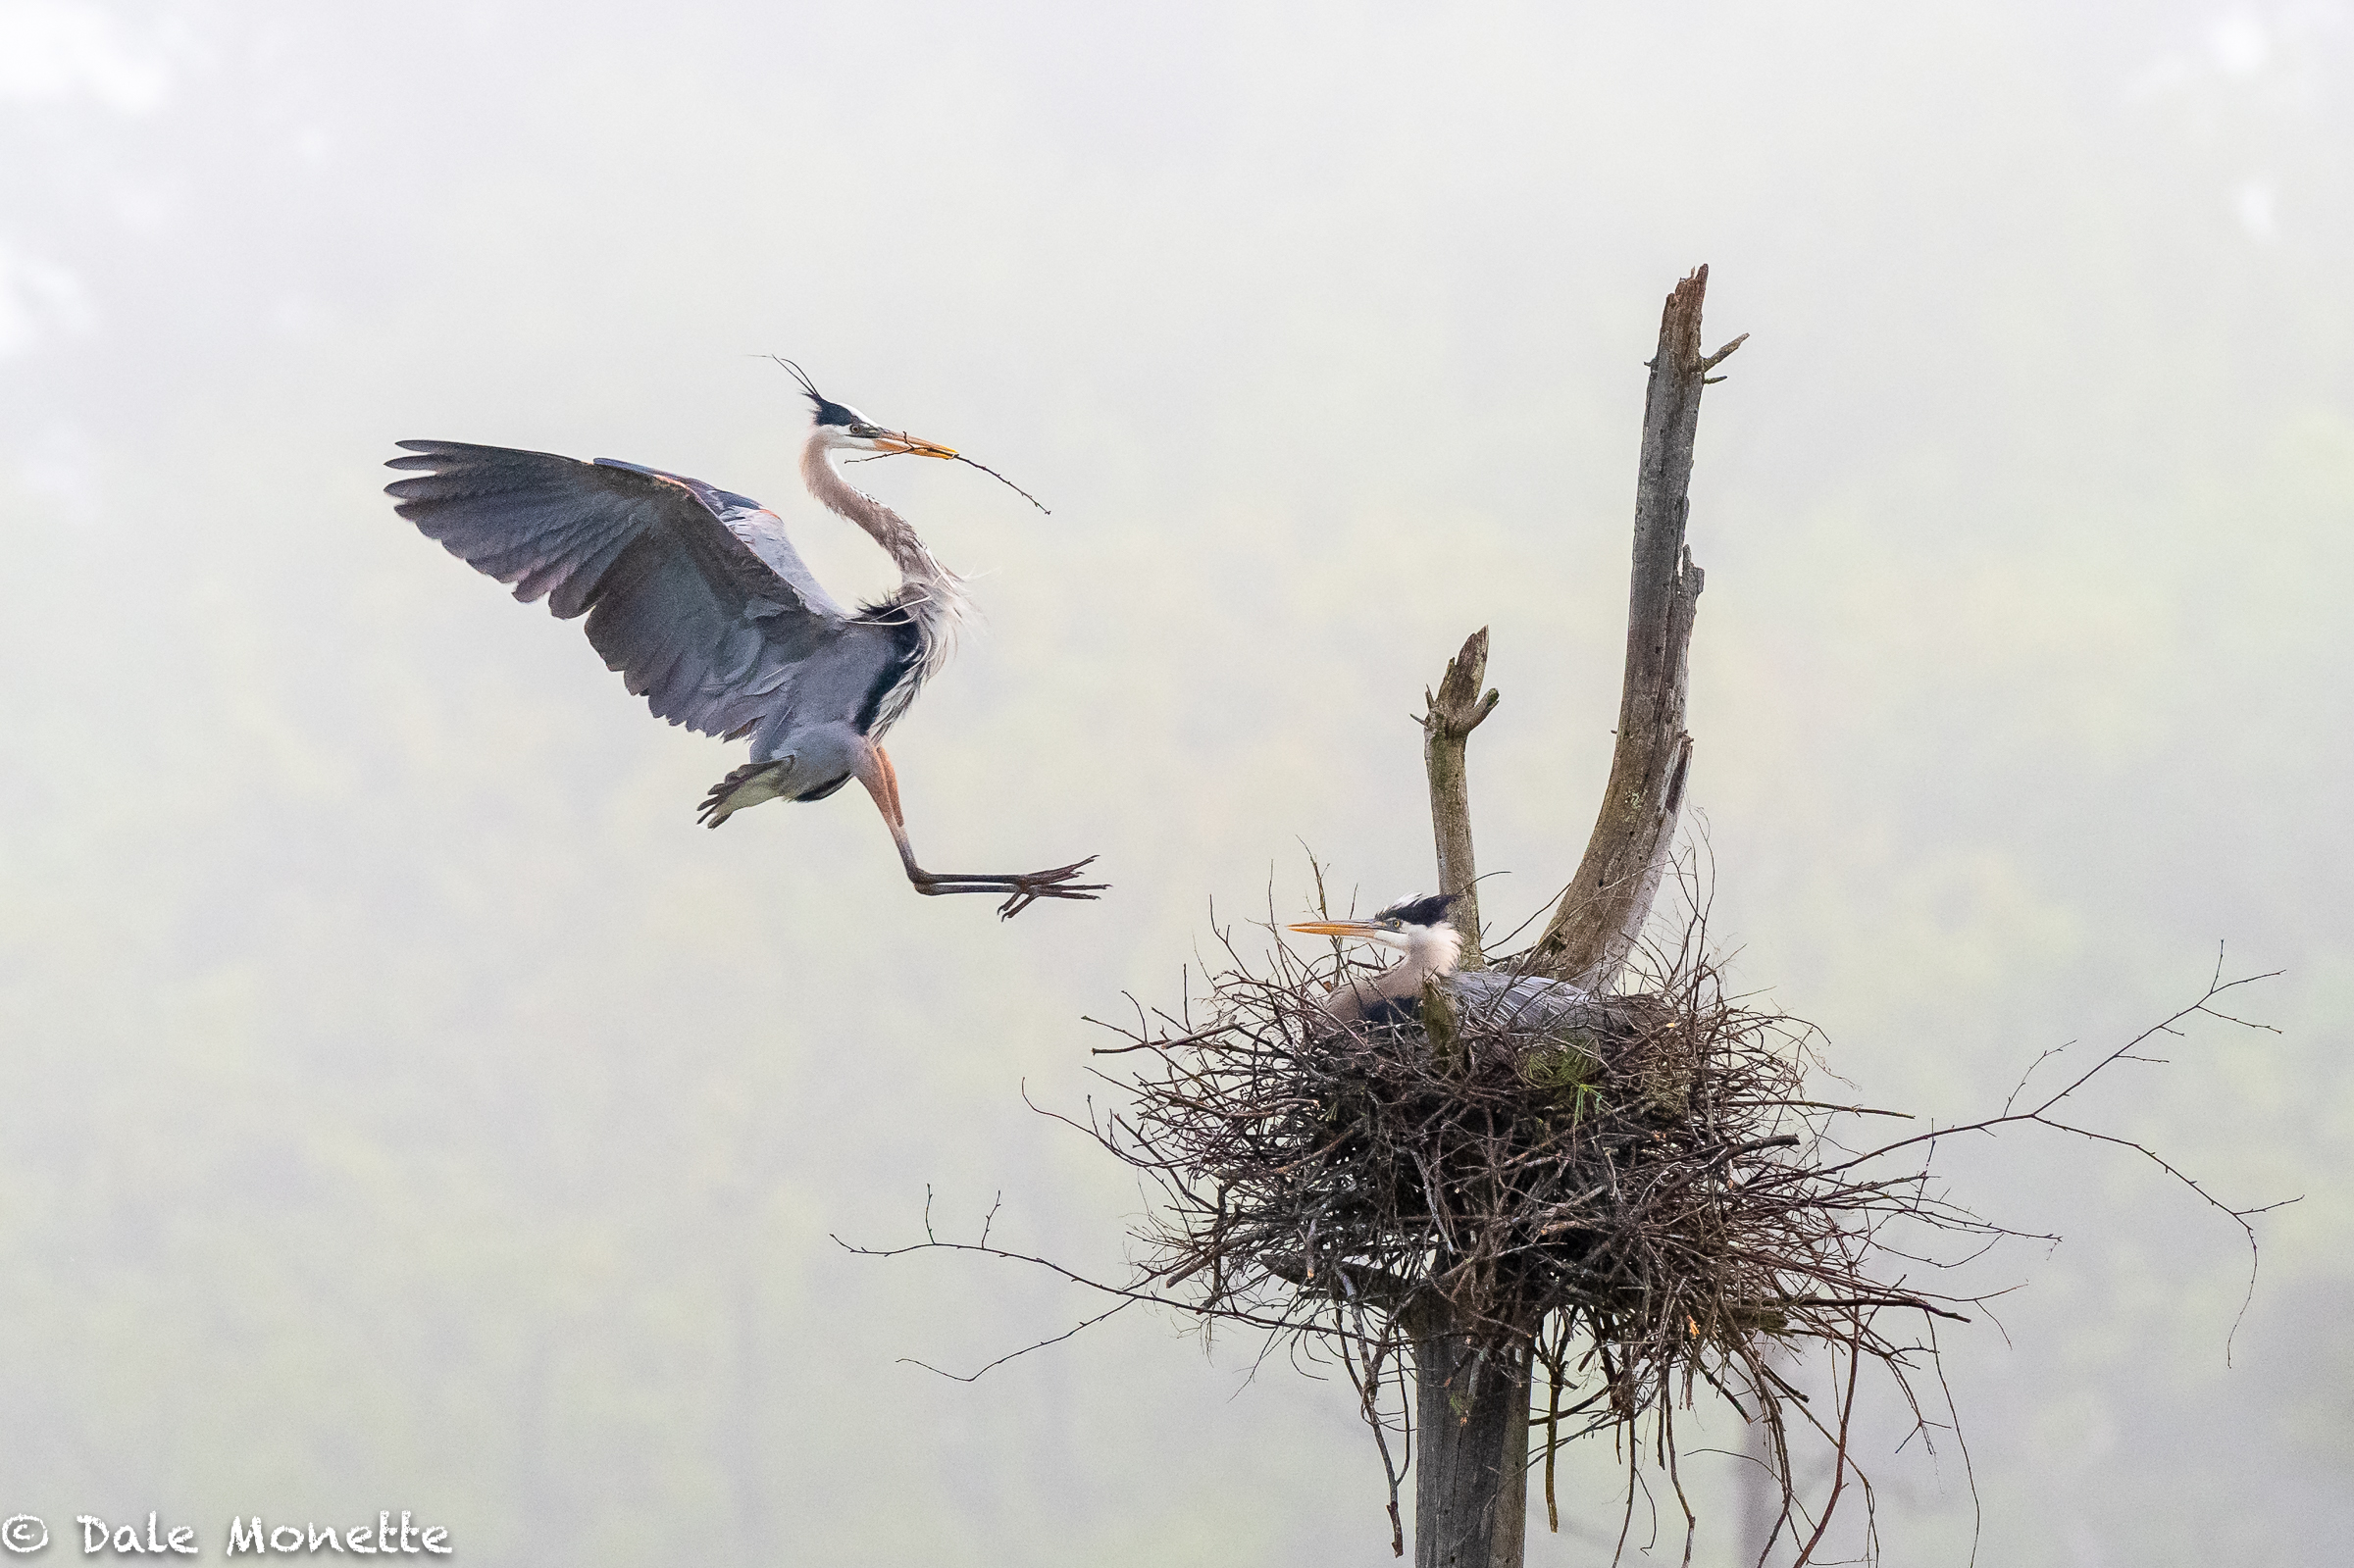   All in 8 days, these great blue herons built a new nest, mated, and in the process of laying eggs. Still a little building to do. Its going to be a close call if these guys can fledge chicks. The chicks will have a challenge to have enough time to 